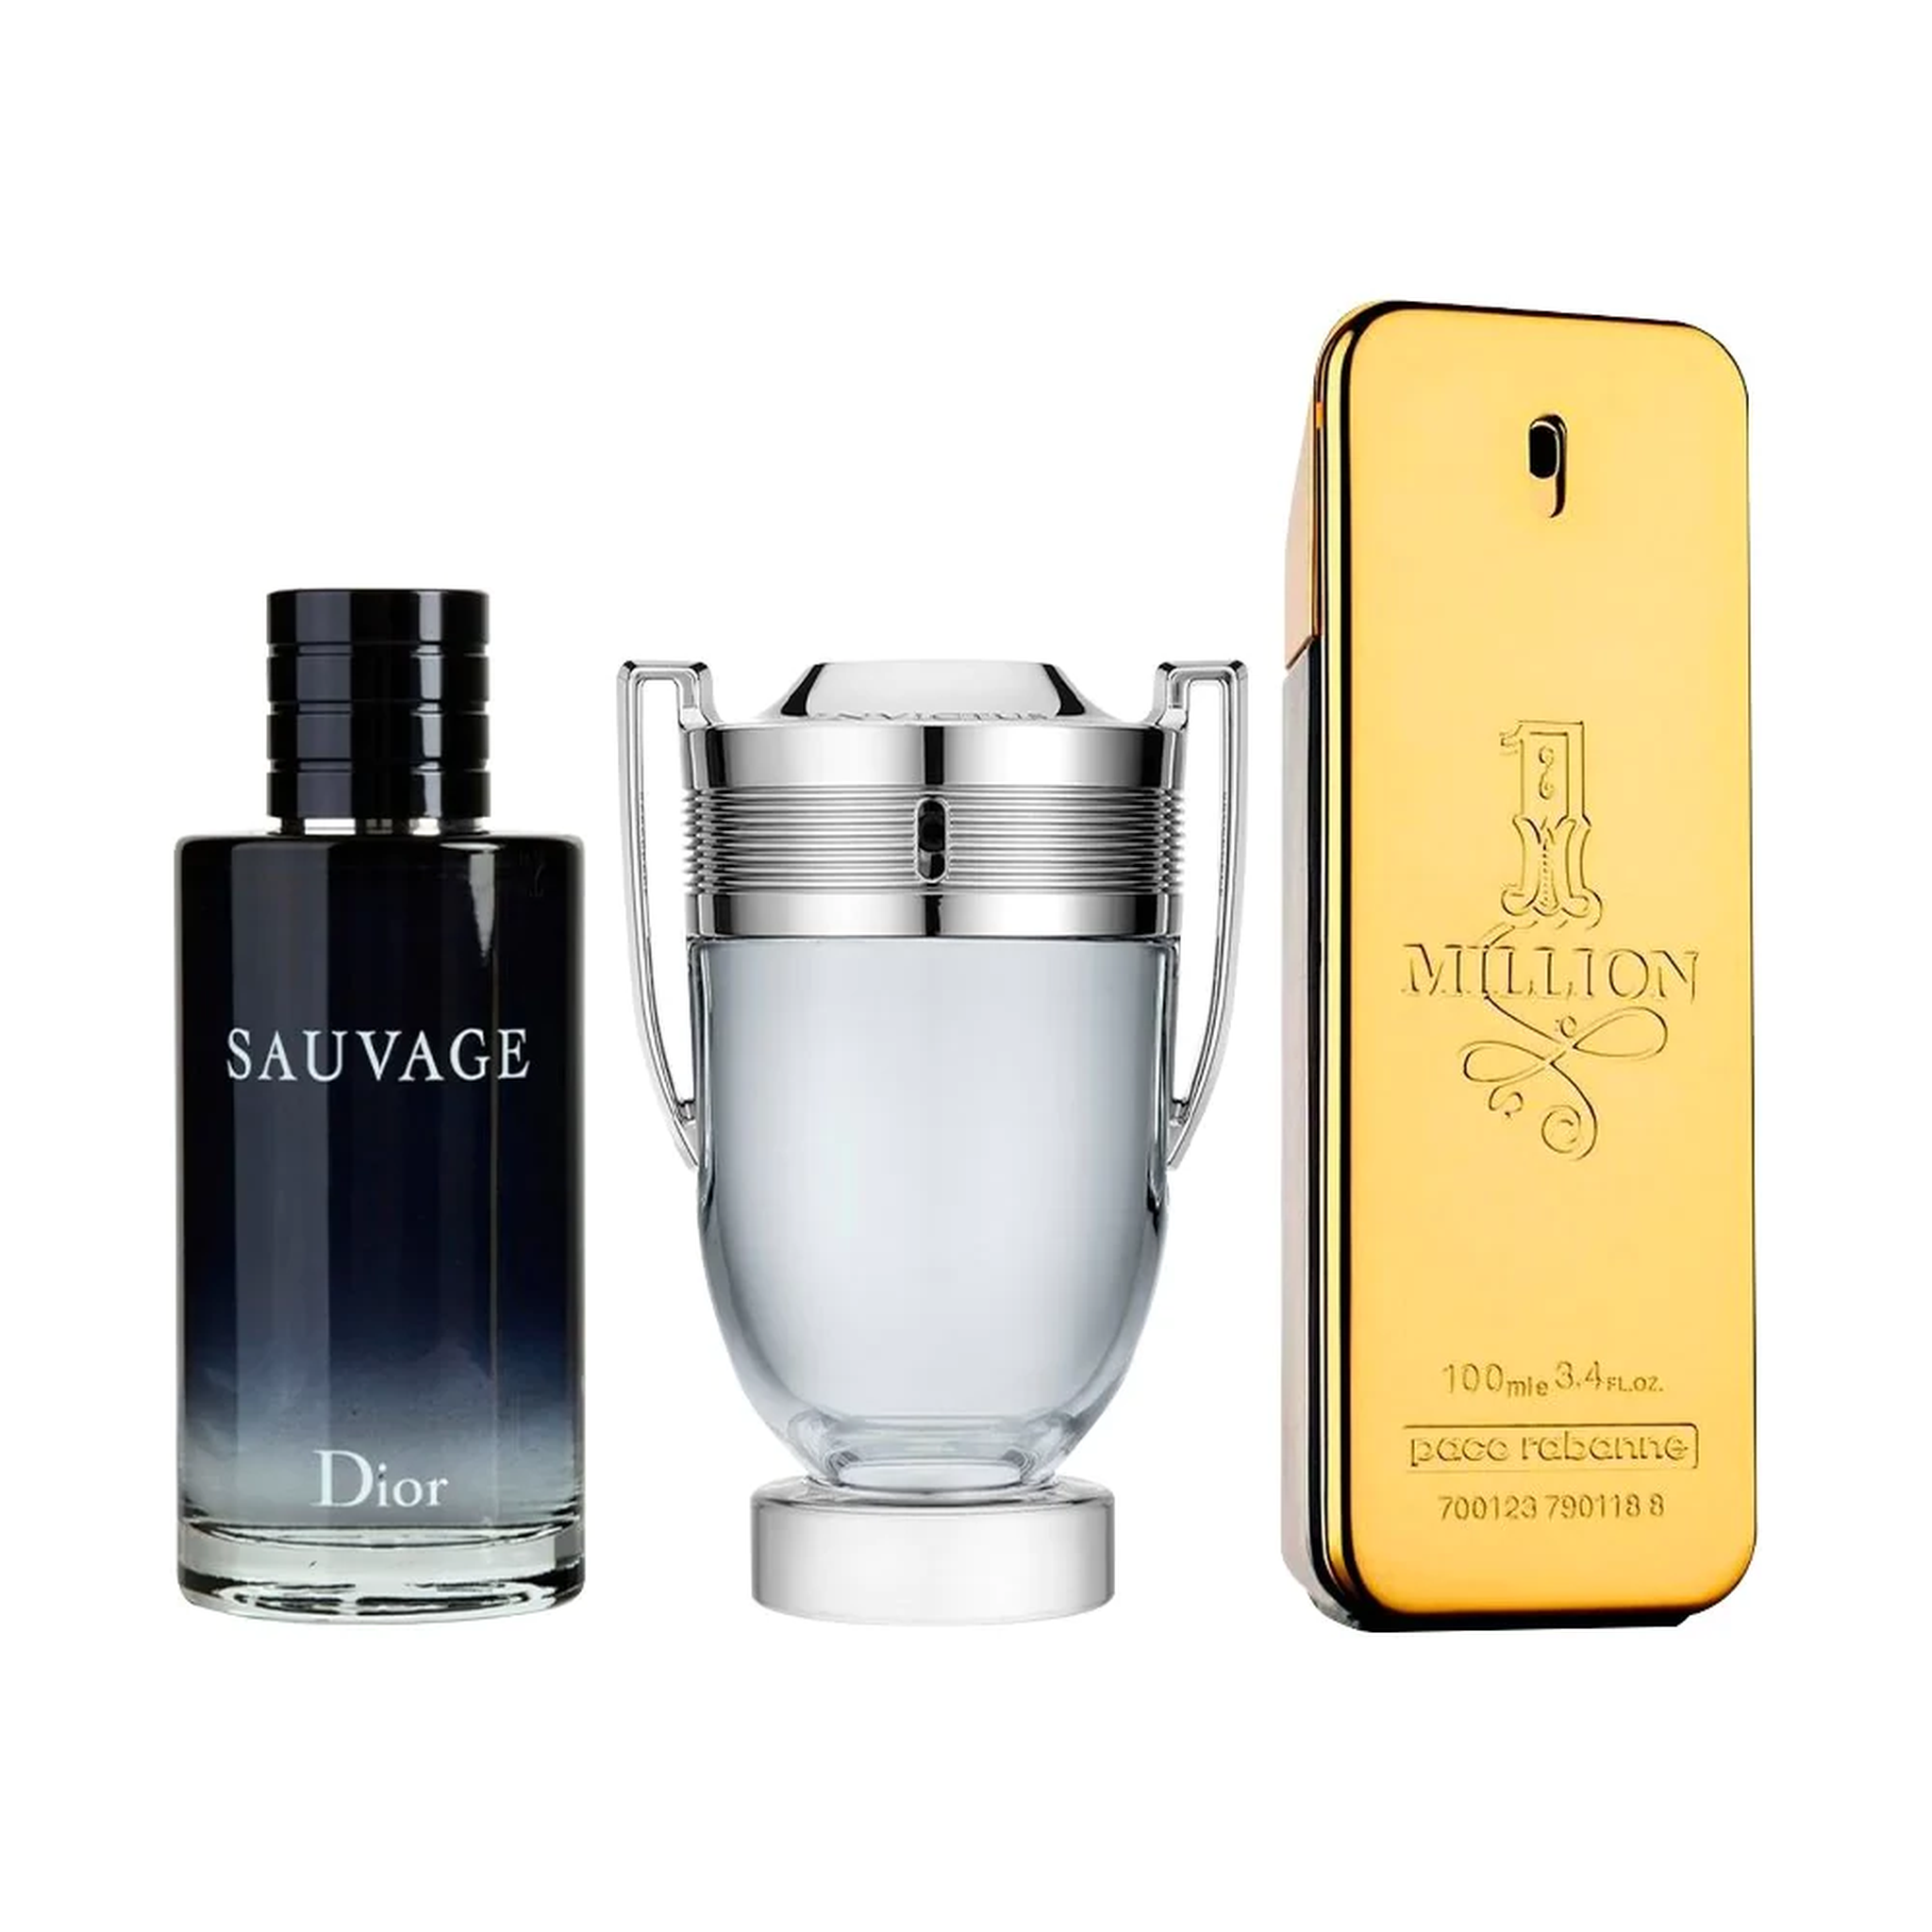 Sauvage Dior No Brasil Clearance Cheapest